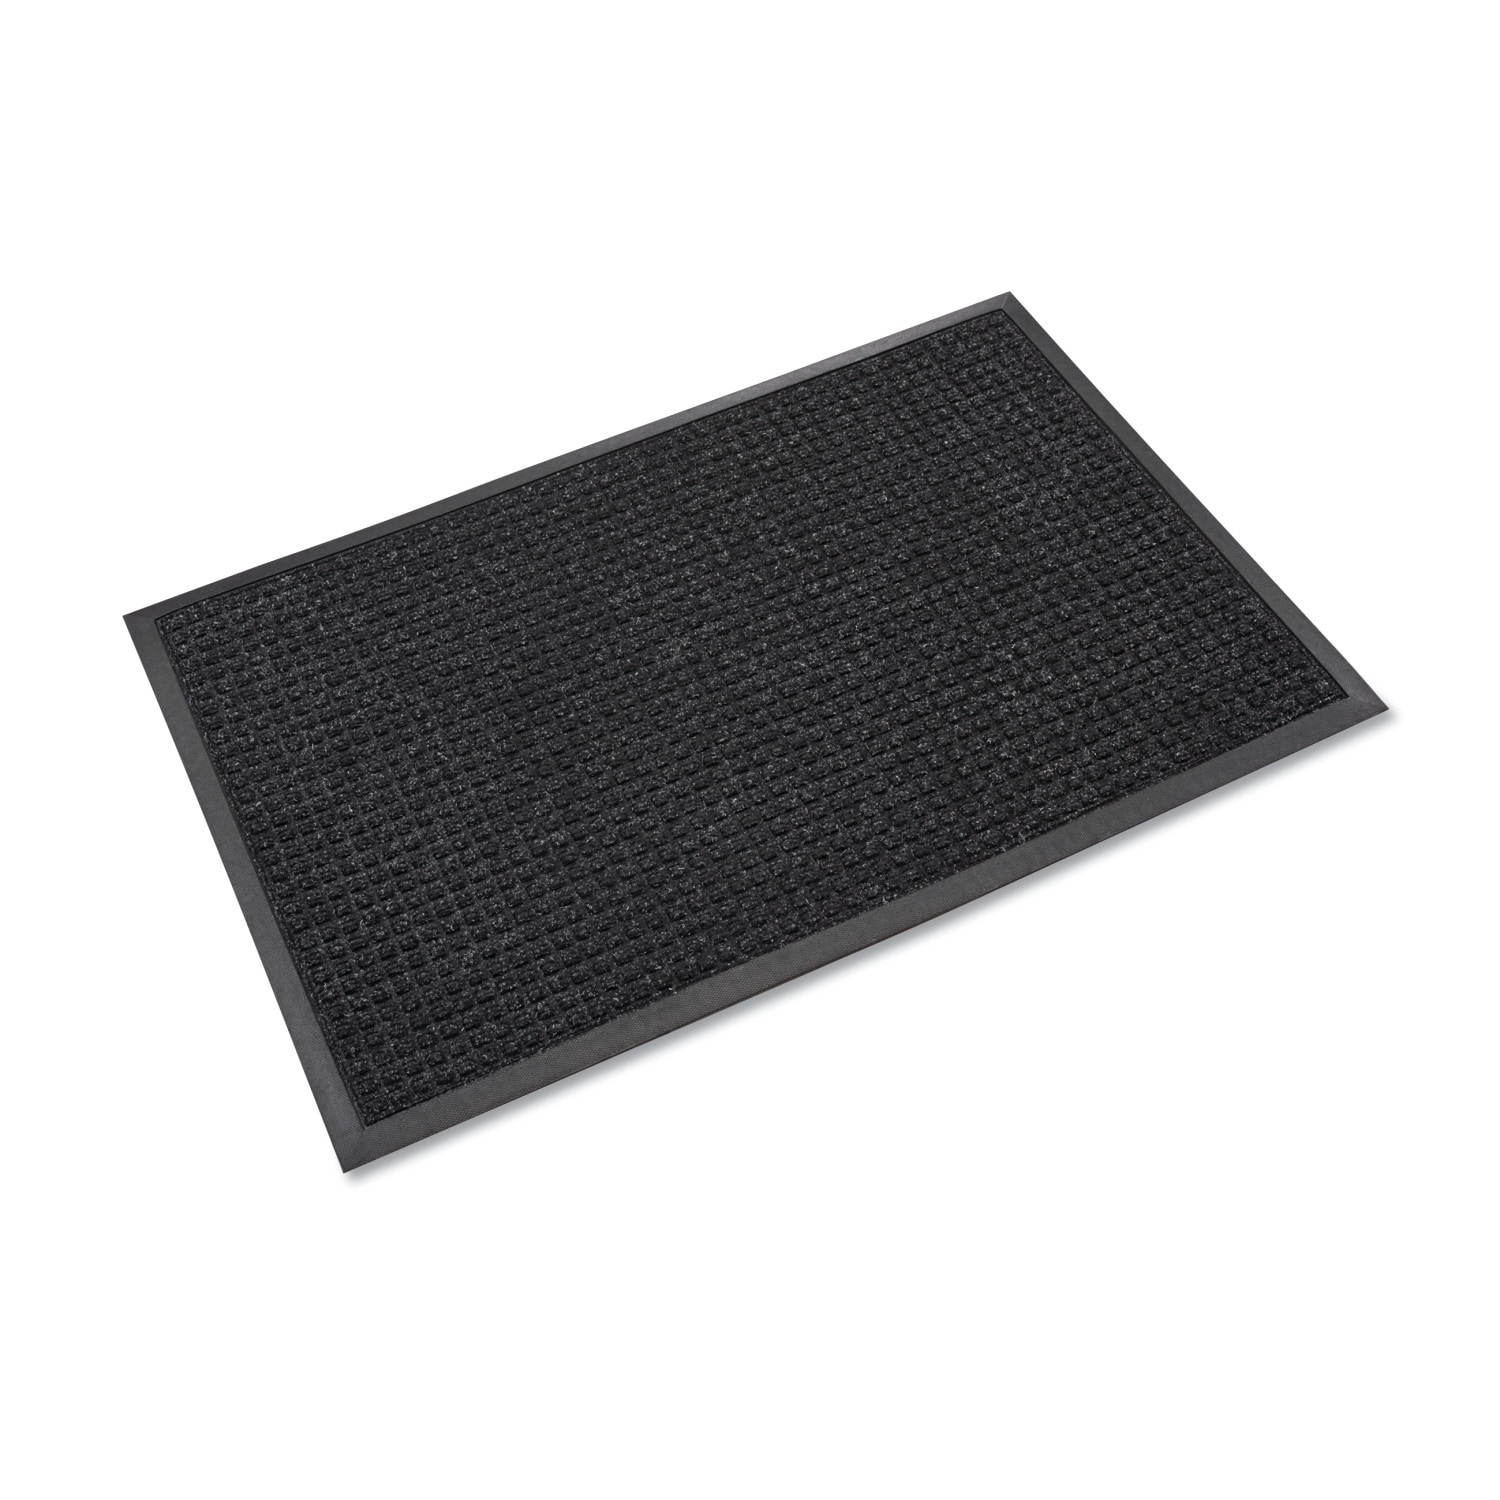 Ottomanson Rubber Collection Doormat 24 x 36 Charcoal